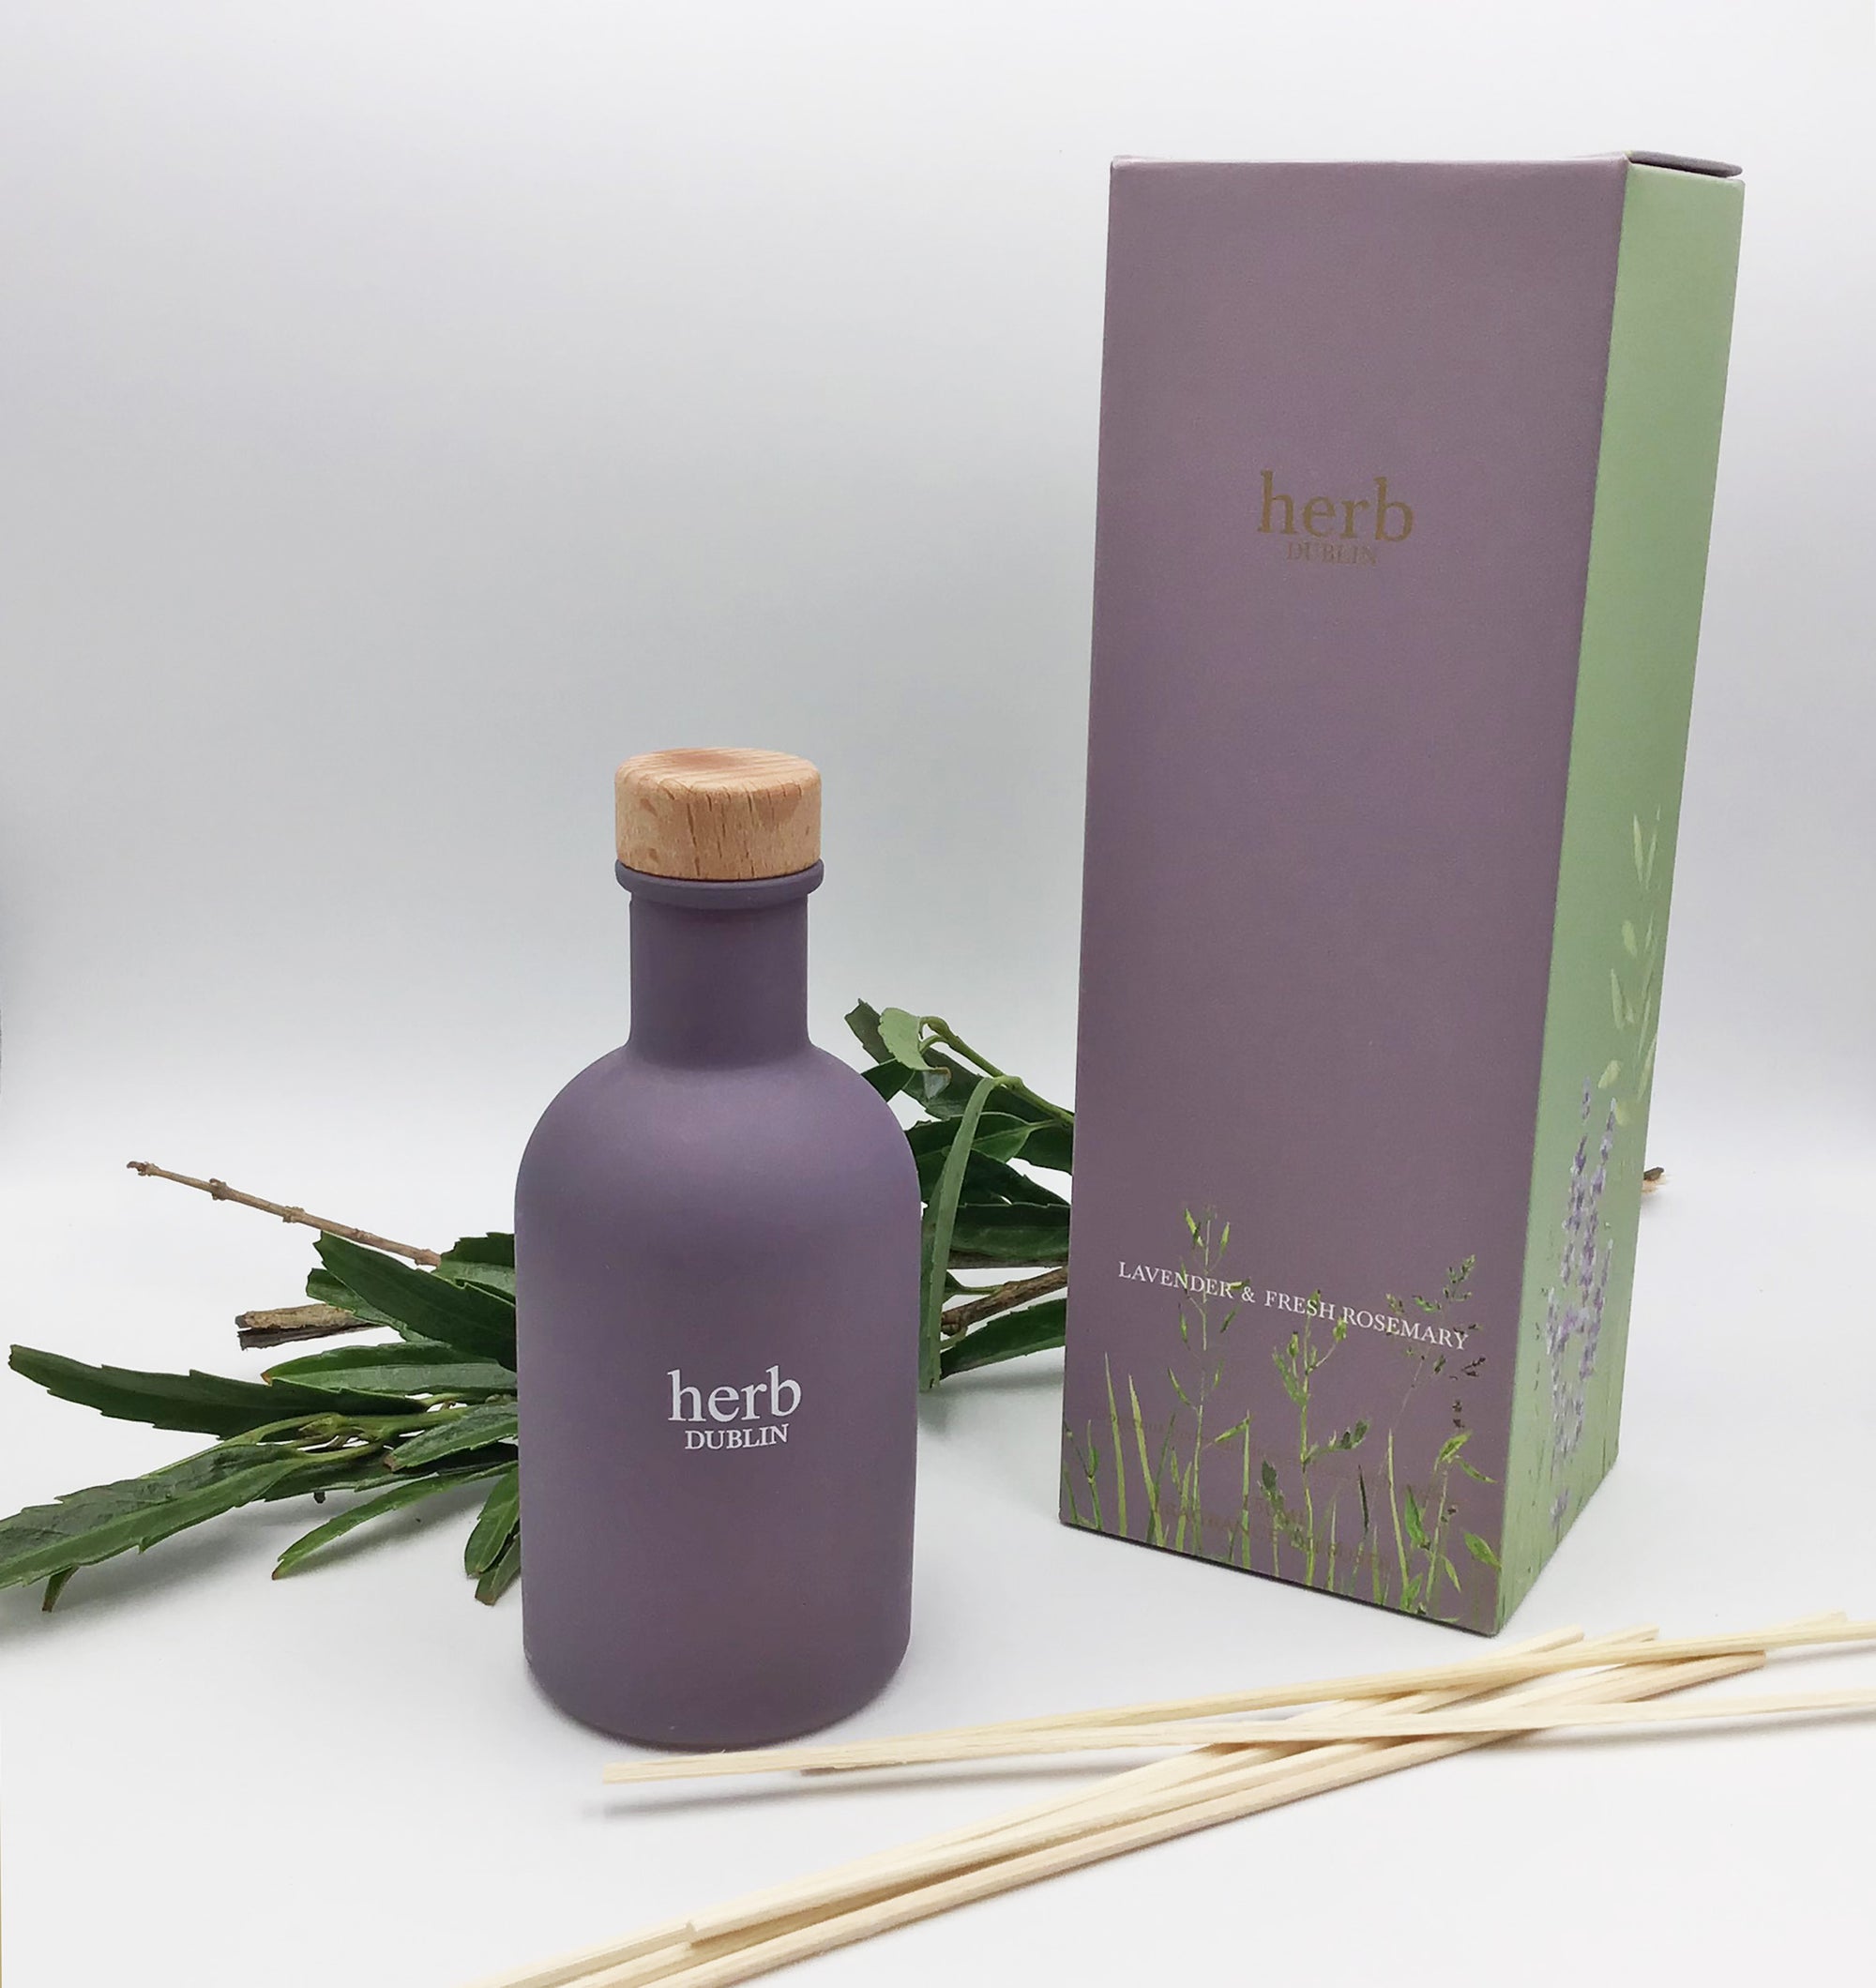 Herb Dublin Lavender and Rosemary Diffuser